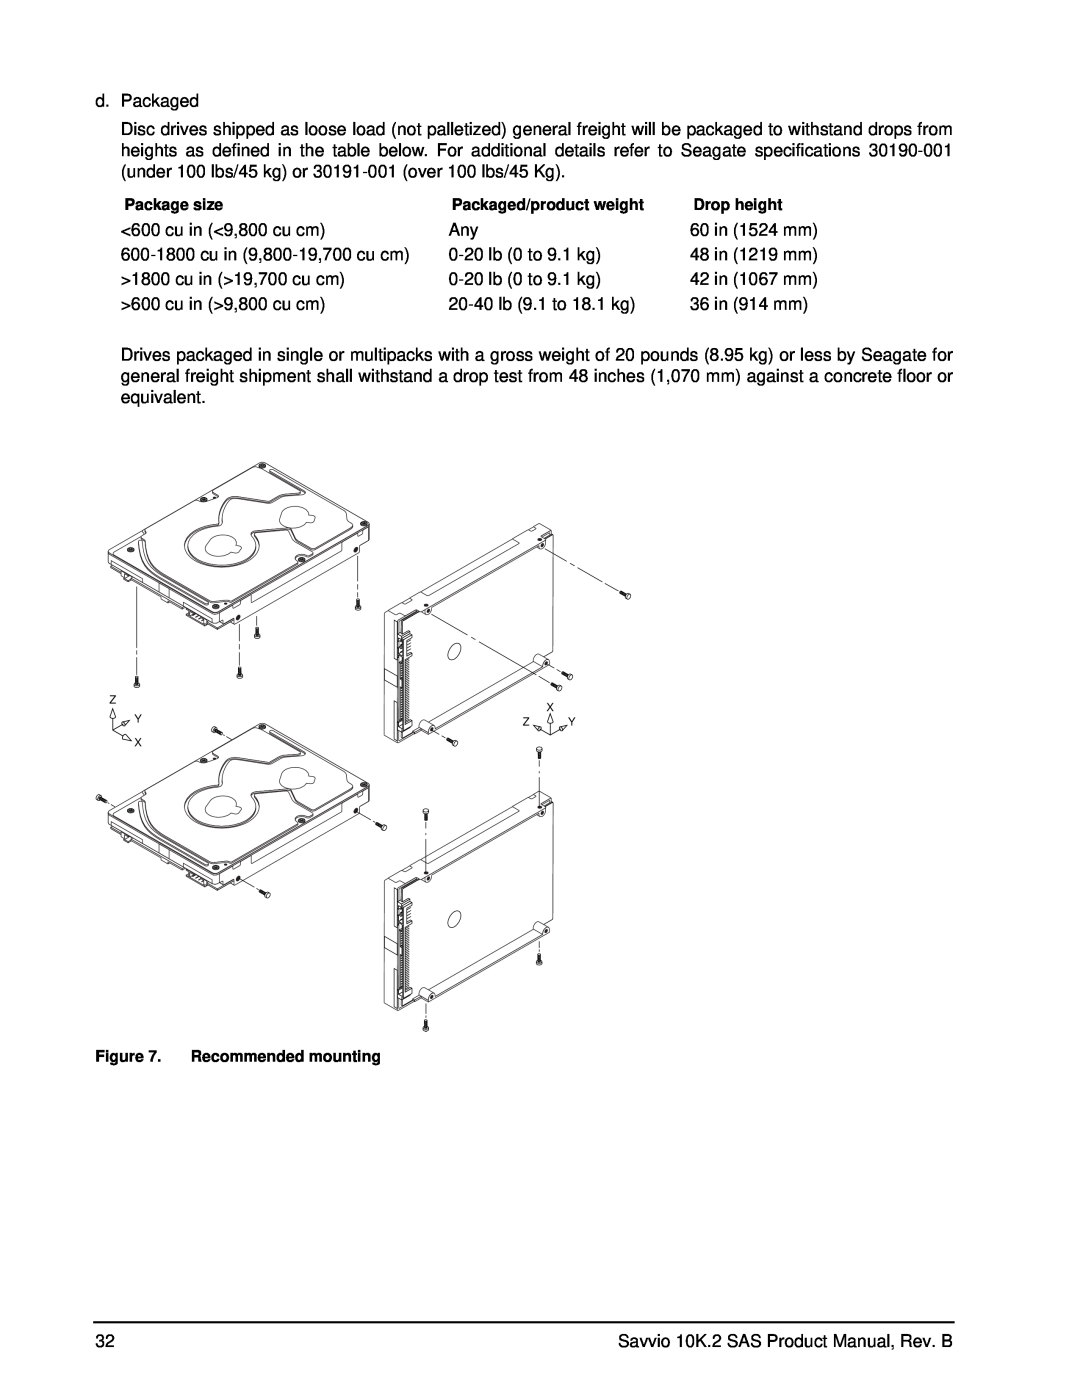 Seagate ST973402SS, ST9146802SS manual Package size, Packaged/product weight, Drop height, Recommended mounting, Z X Yz Y X 